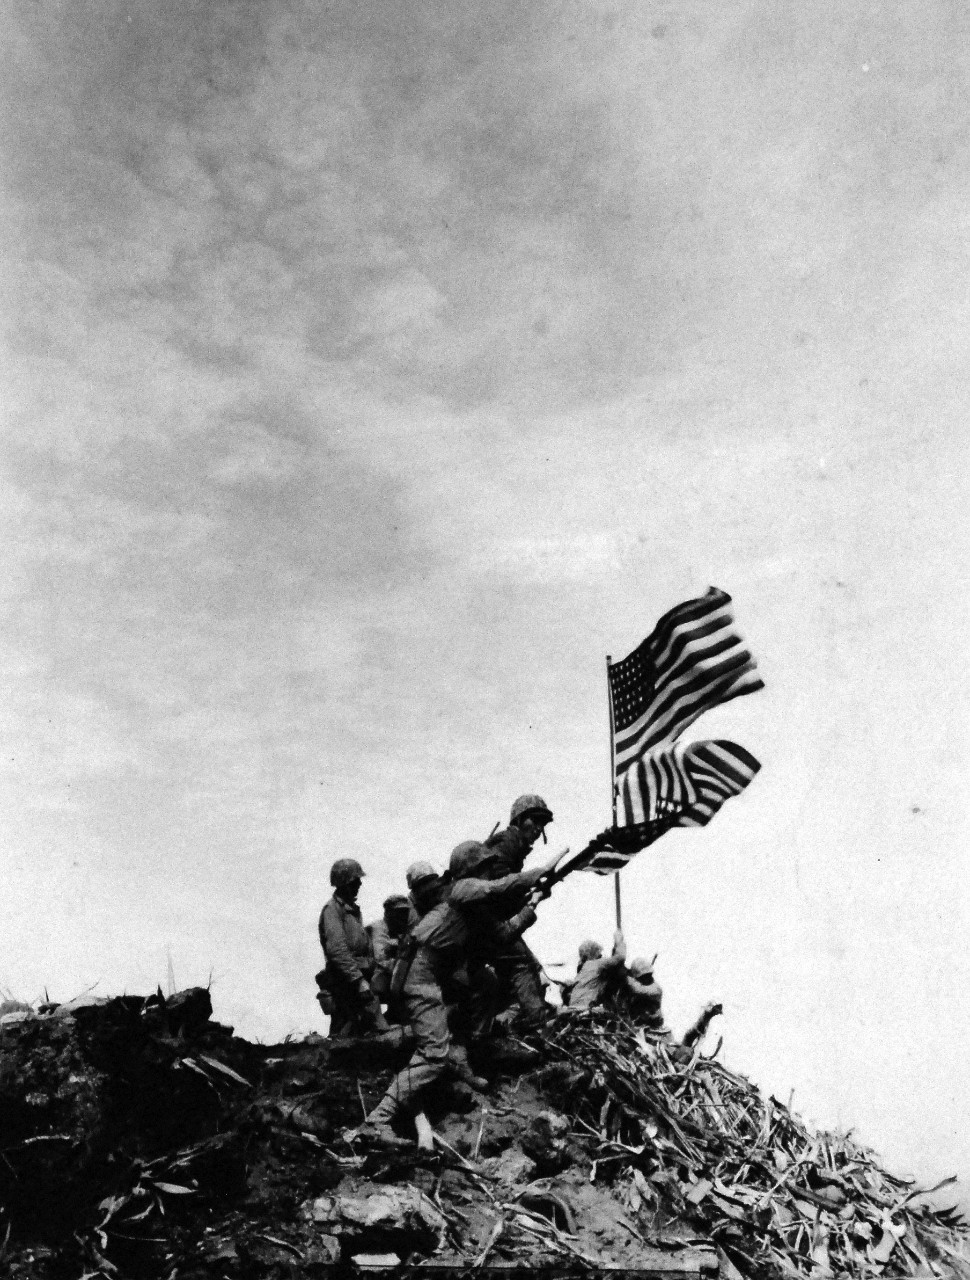 127-GW-319-112718:   Iwo Jima Operations,  February  1945.   Installing the large flag on Mount Suribachi.   Photographed by Bob Campbell, February 23, 1945.   Official  U.S. Marine Corps Photograph, now in the collections of the National Archives.  (2016/09/06).